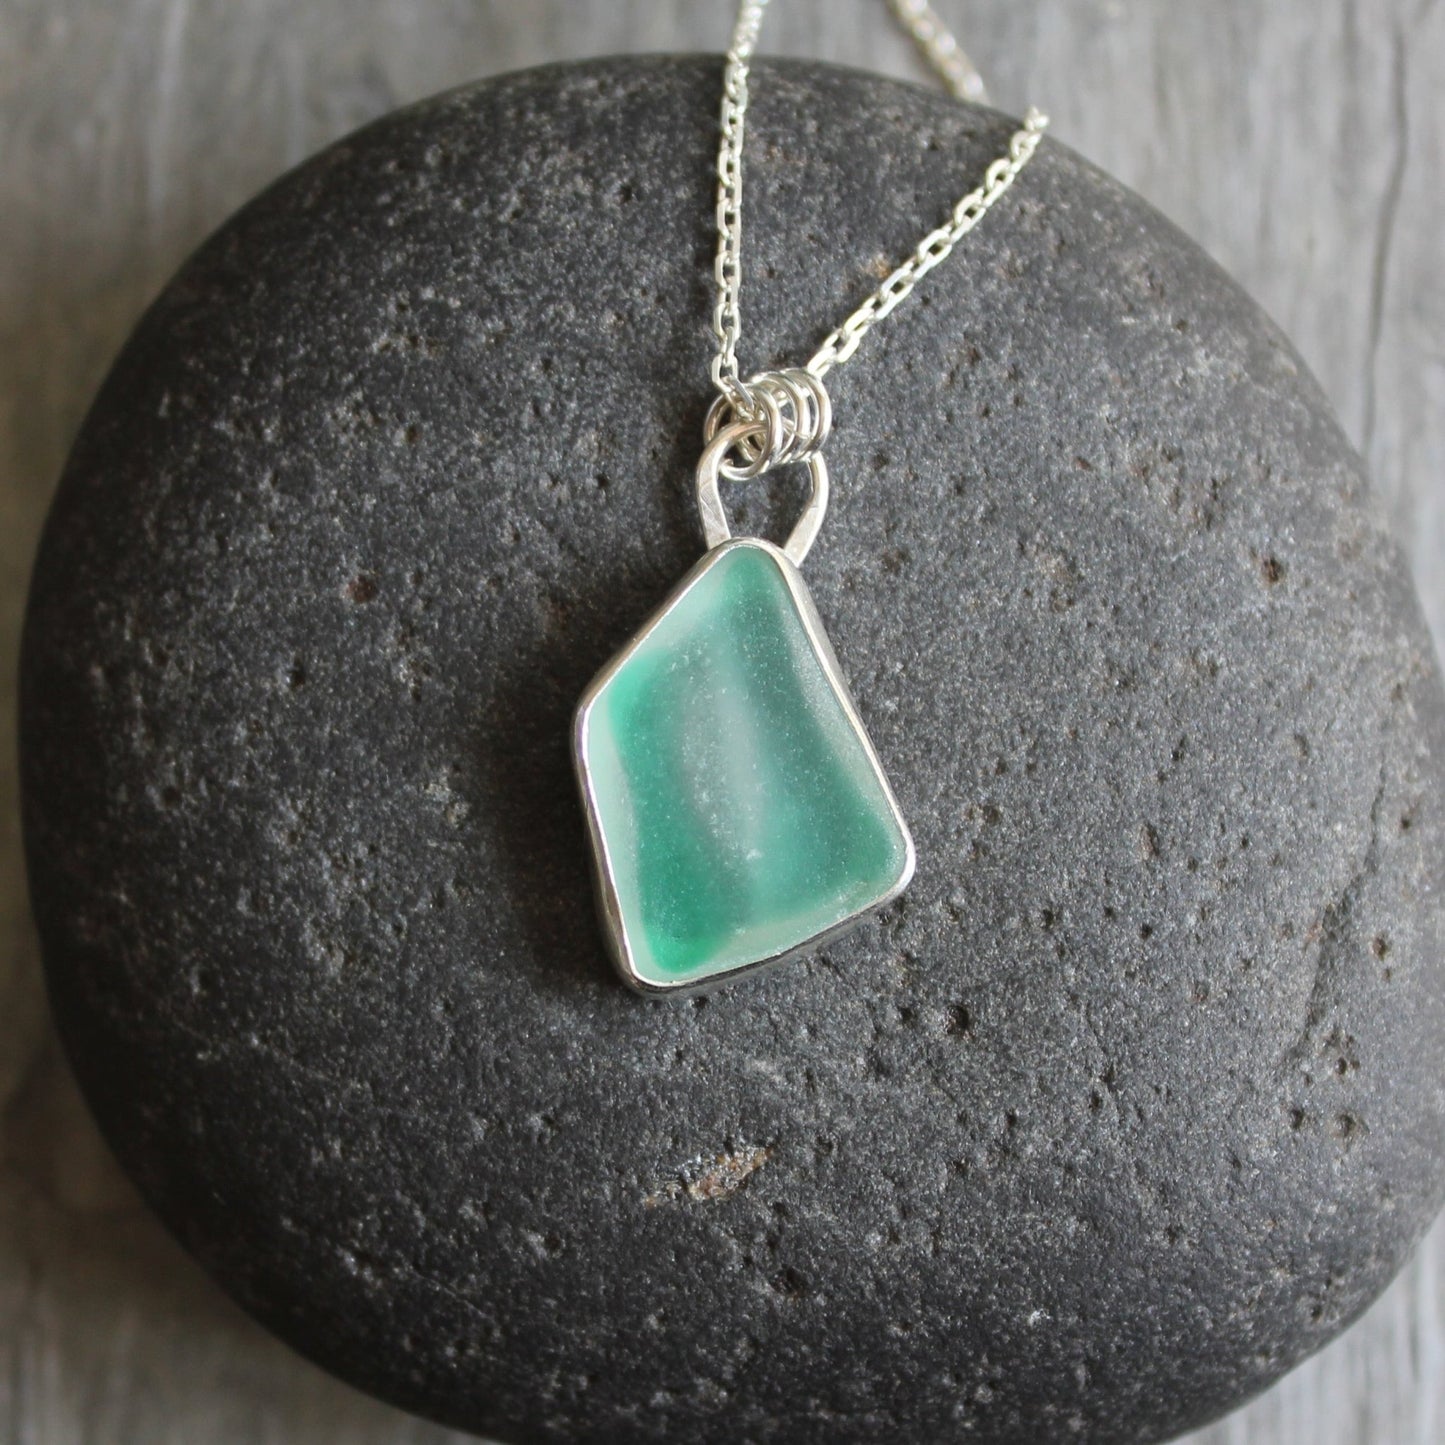 Rare Green and White Sea Glass Necklace - AccentYourself